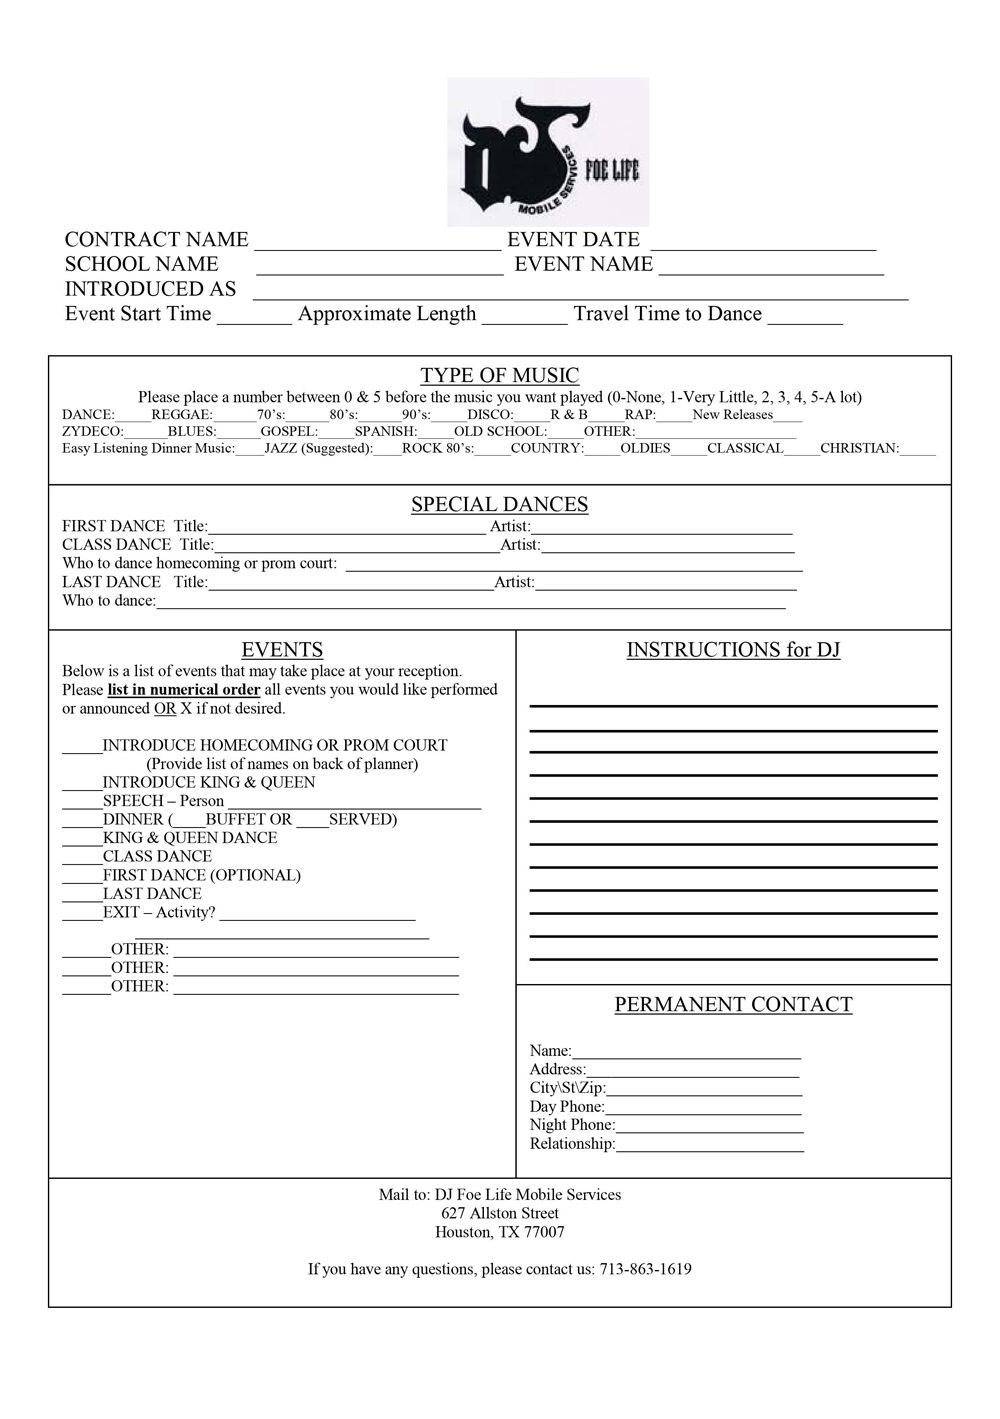 Booking Form For Your School Dance